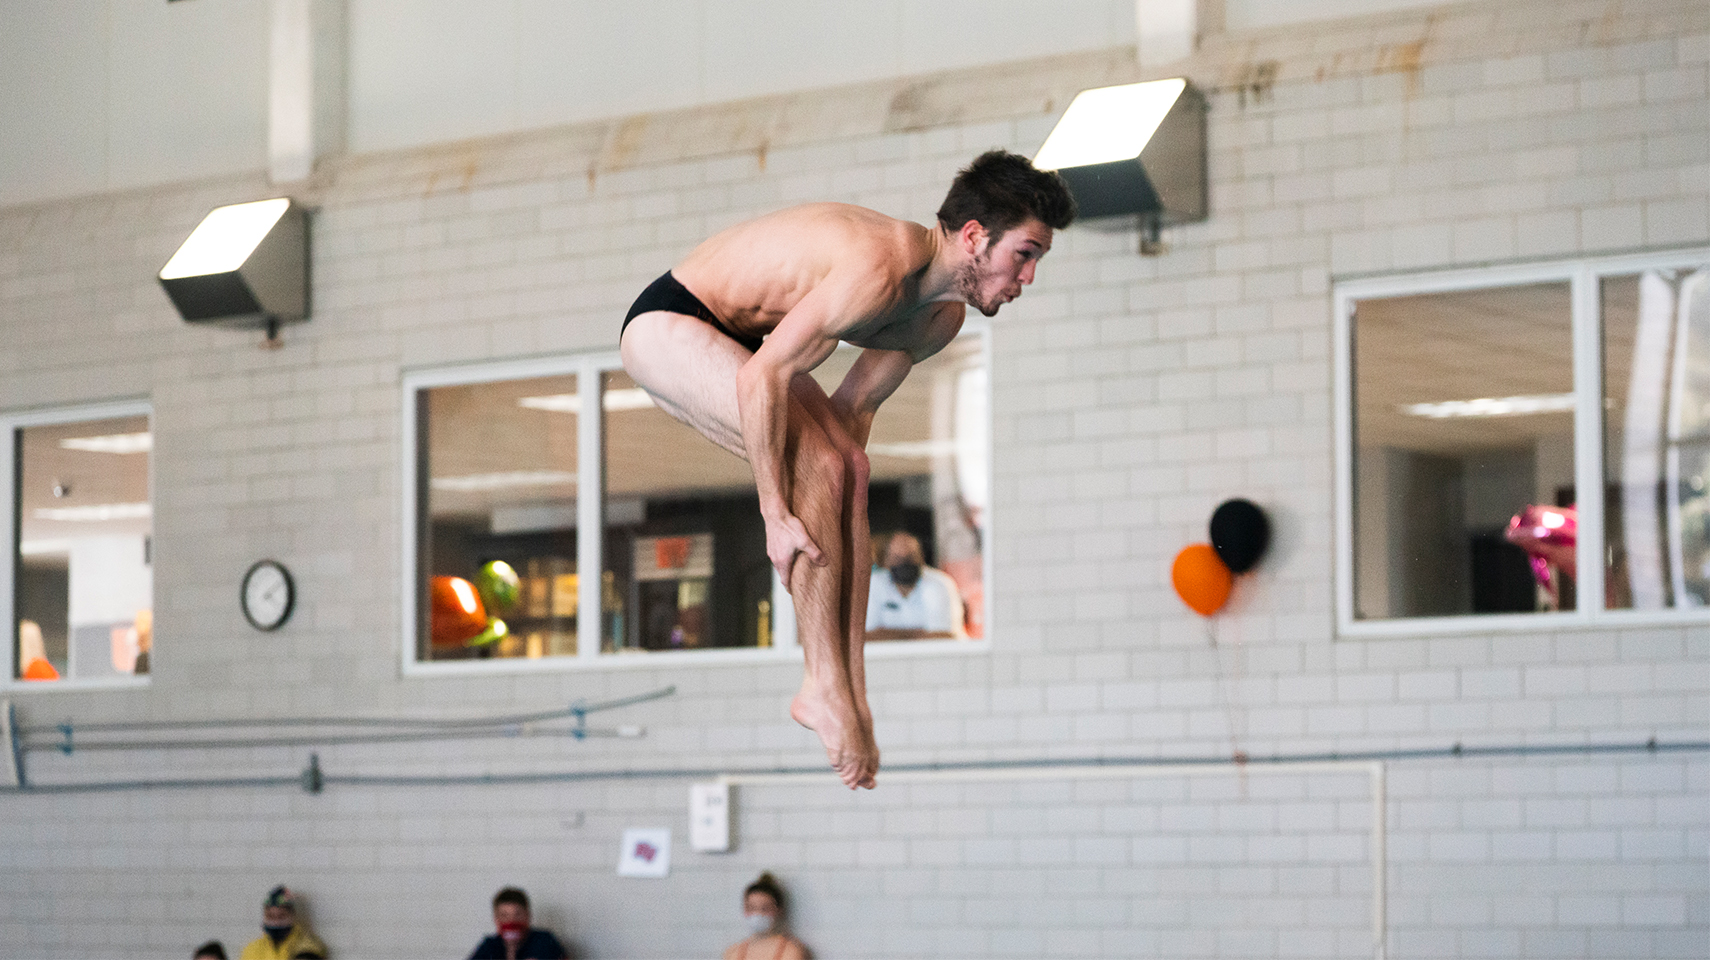 Men's diver at his highest point before dropping into the water